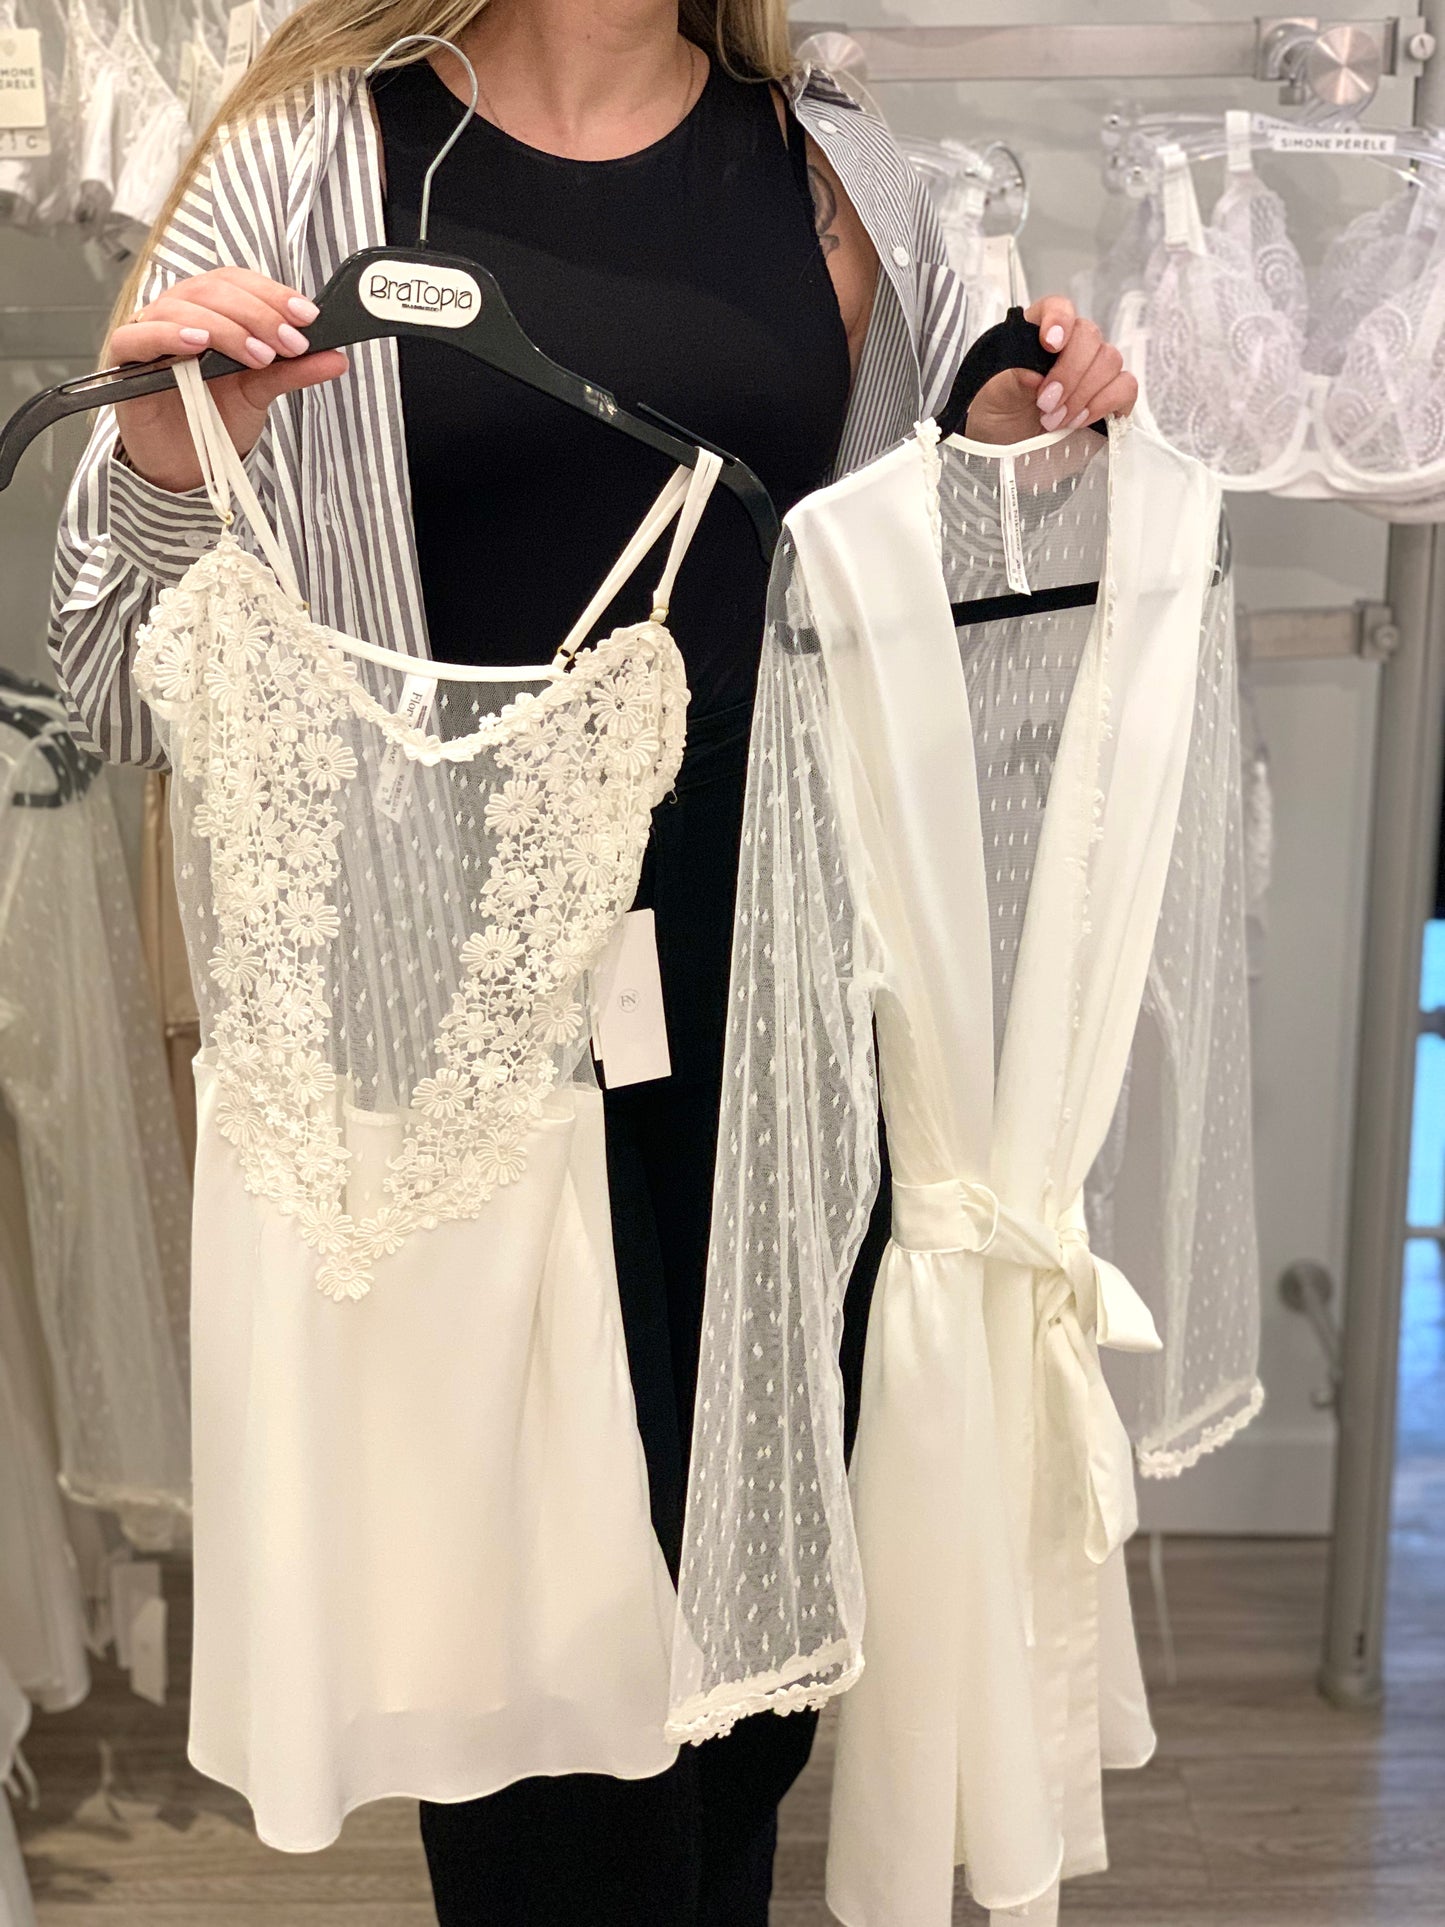 Bridal Shower Experience - Say Yes to the Bridal Lingerie!